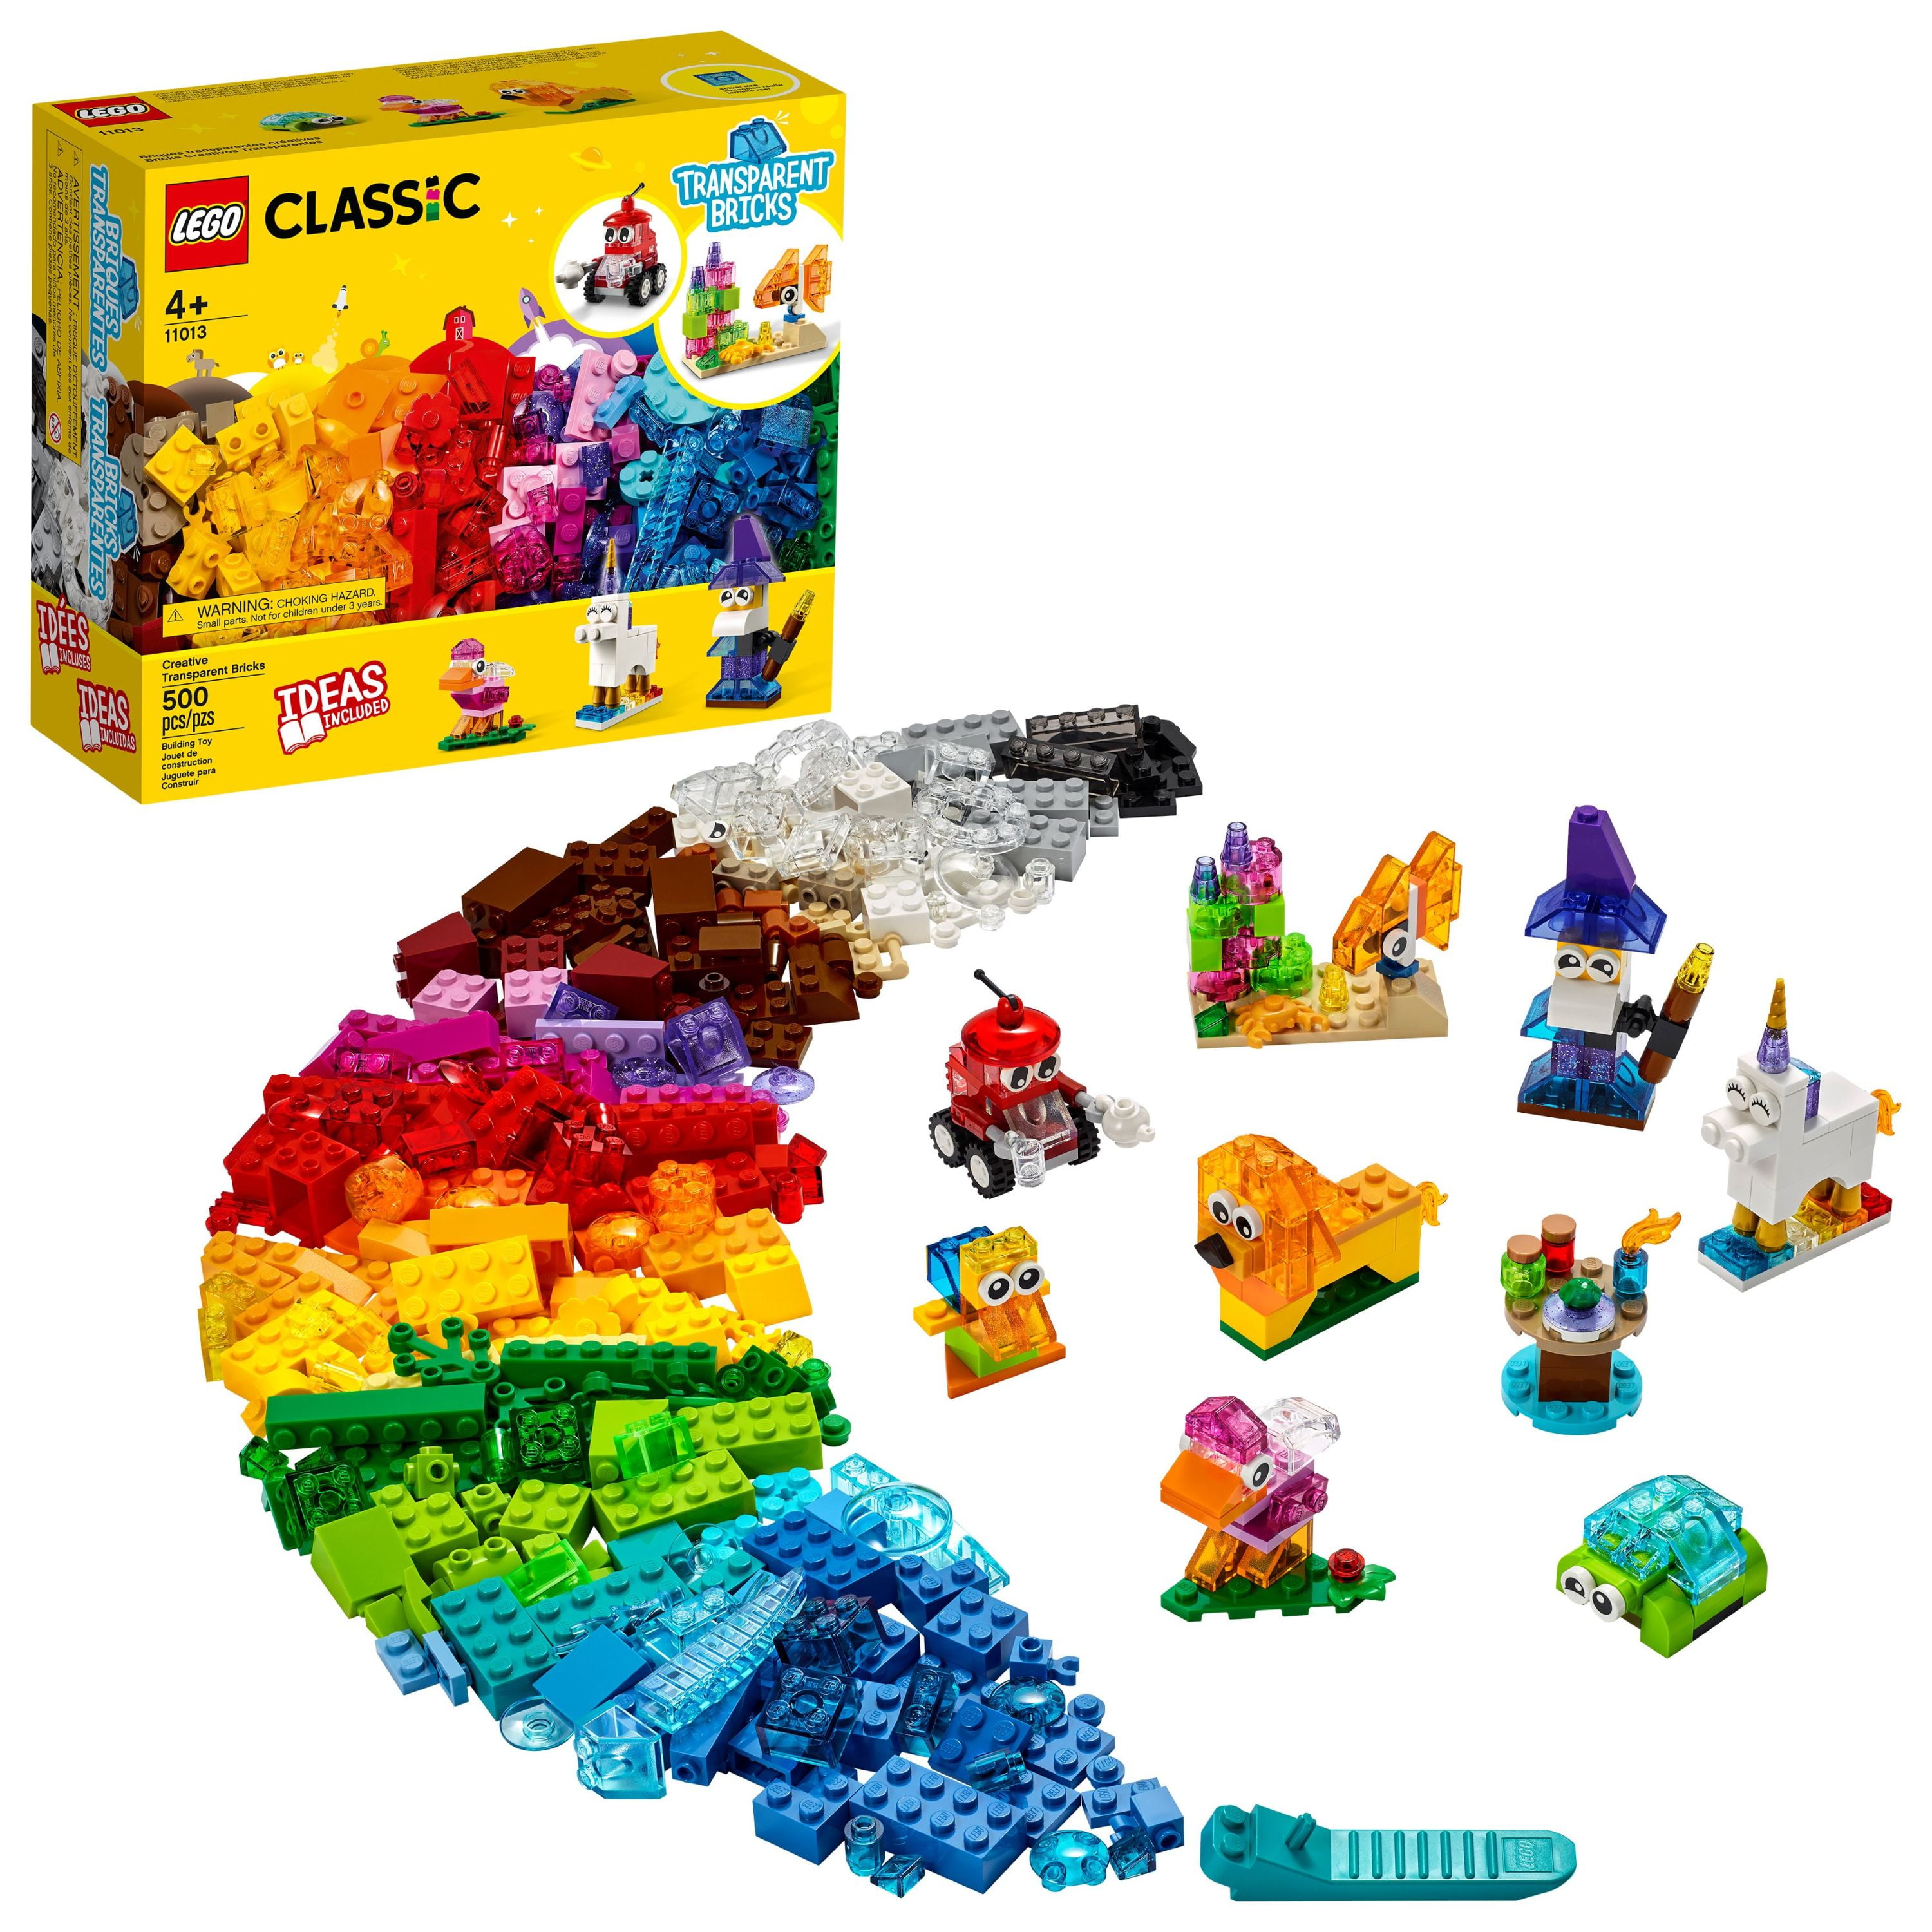 omgive fad Besiddelse LEGO Classic Creative Transparent Bricks Building Set 11013 with Wizard and  Animal Figures Including Unicorn, Lion, Bird, and Turtle Toys, Preschool  Learning Toy for 4 Plus Year Old Kids - Walmart.com